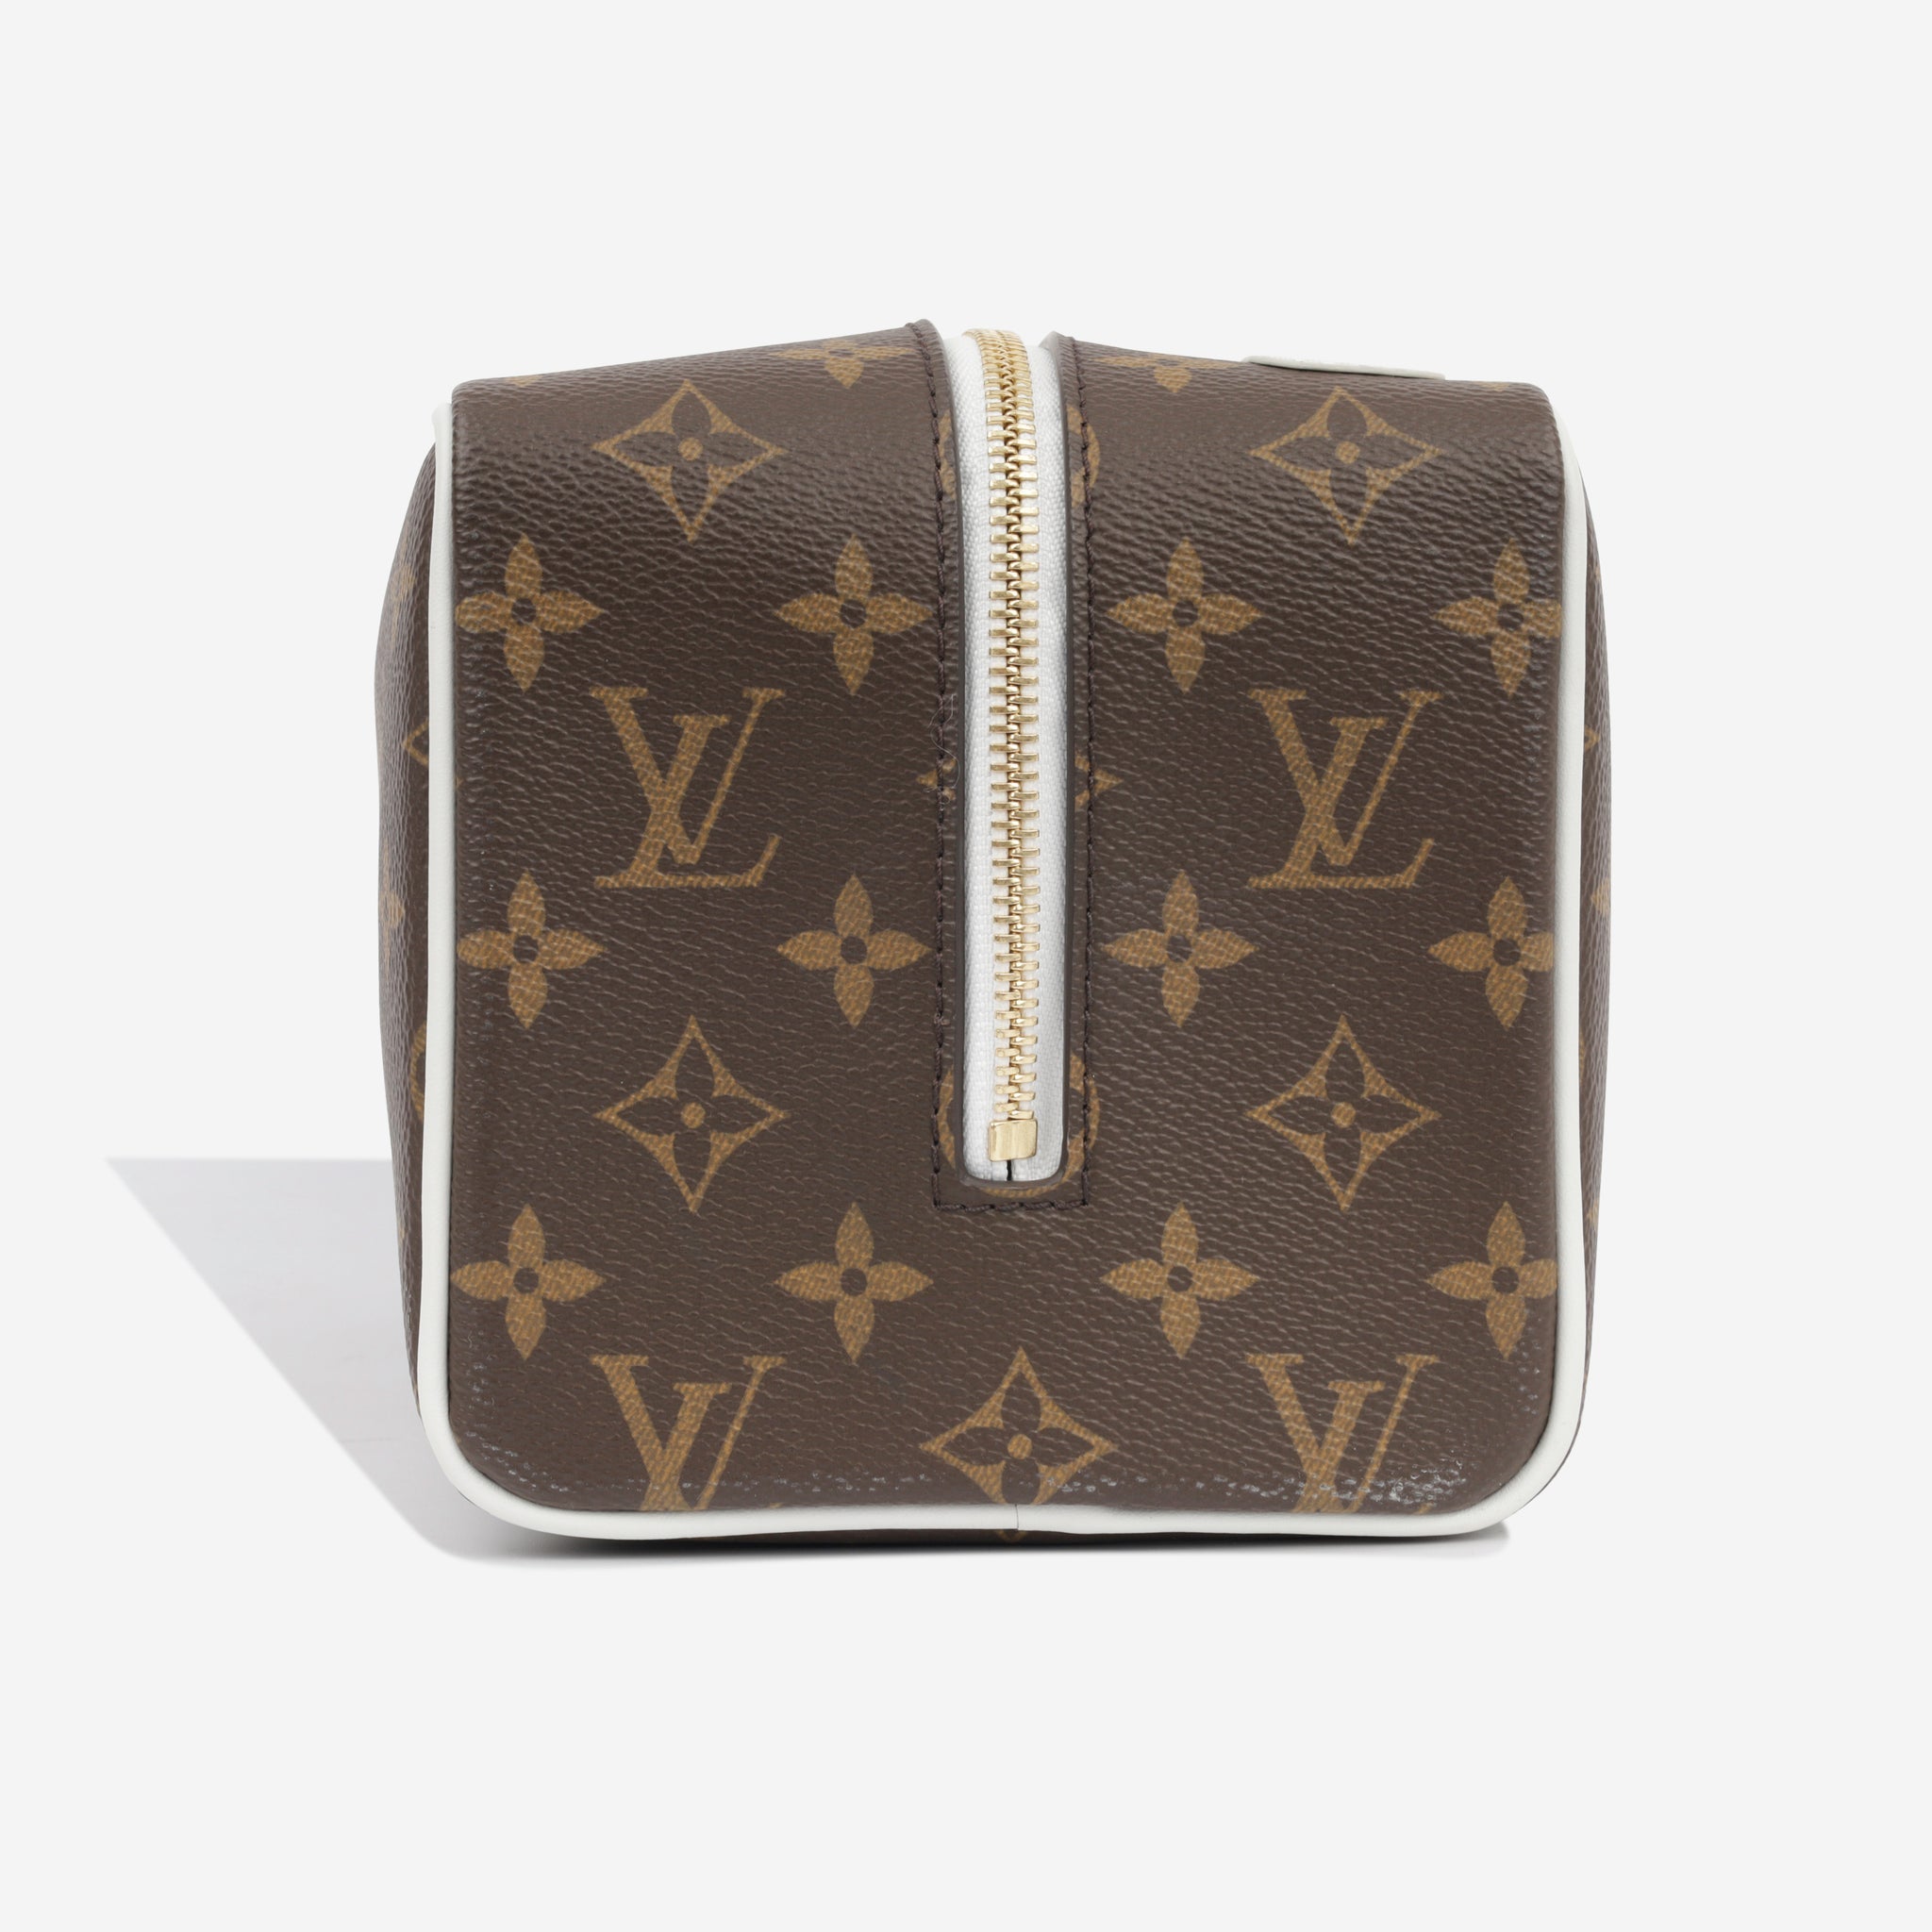 Dopp kit cloakroom leather bag Louis Vuitton X NBA Black in Leather -  17703116